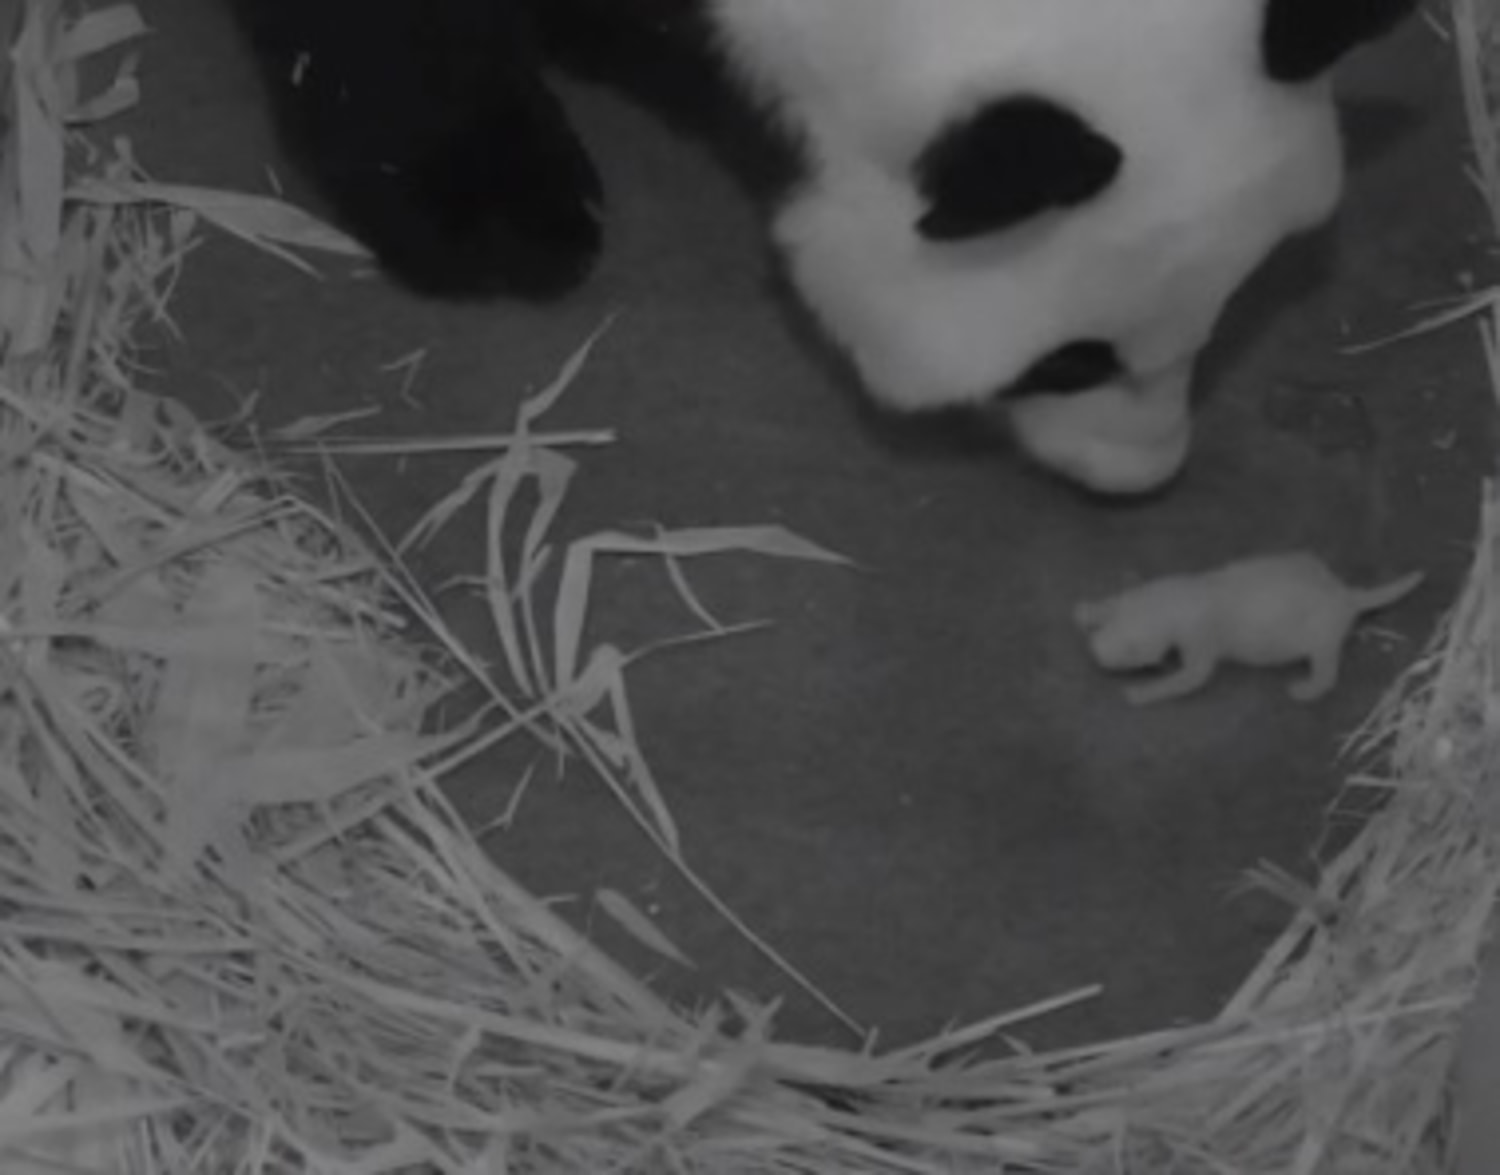 Cub obsession forces National Zoo to limit panda cam viewing time